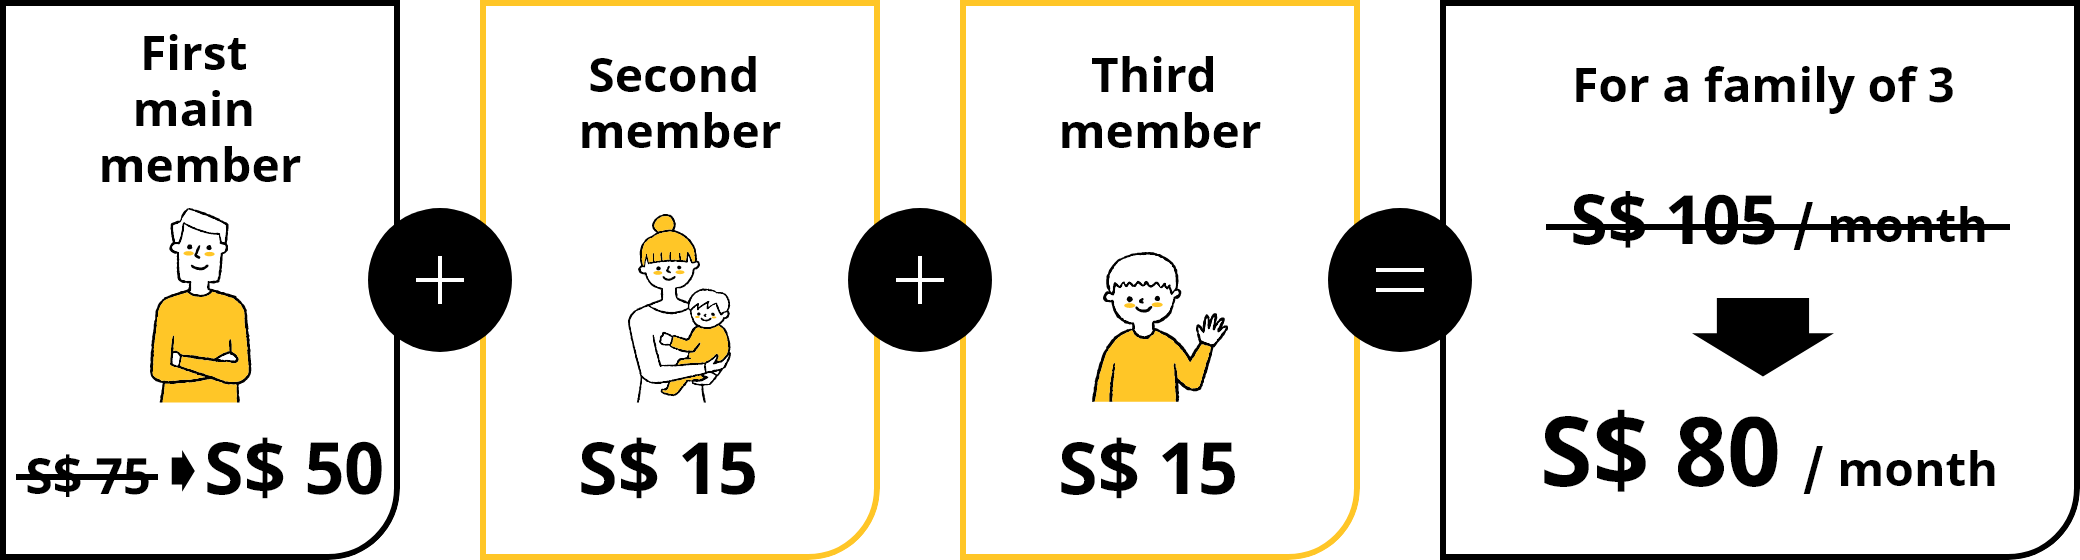 First main member S$ 75 / month Second member S$ 15 / Third member S$ 15 / month For a family of 3 S$ 105 / month Cost per pax S$ 105 / month